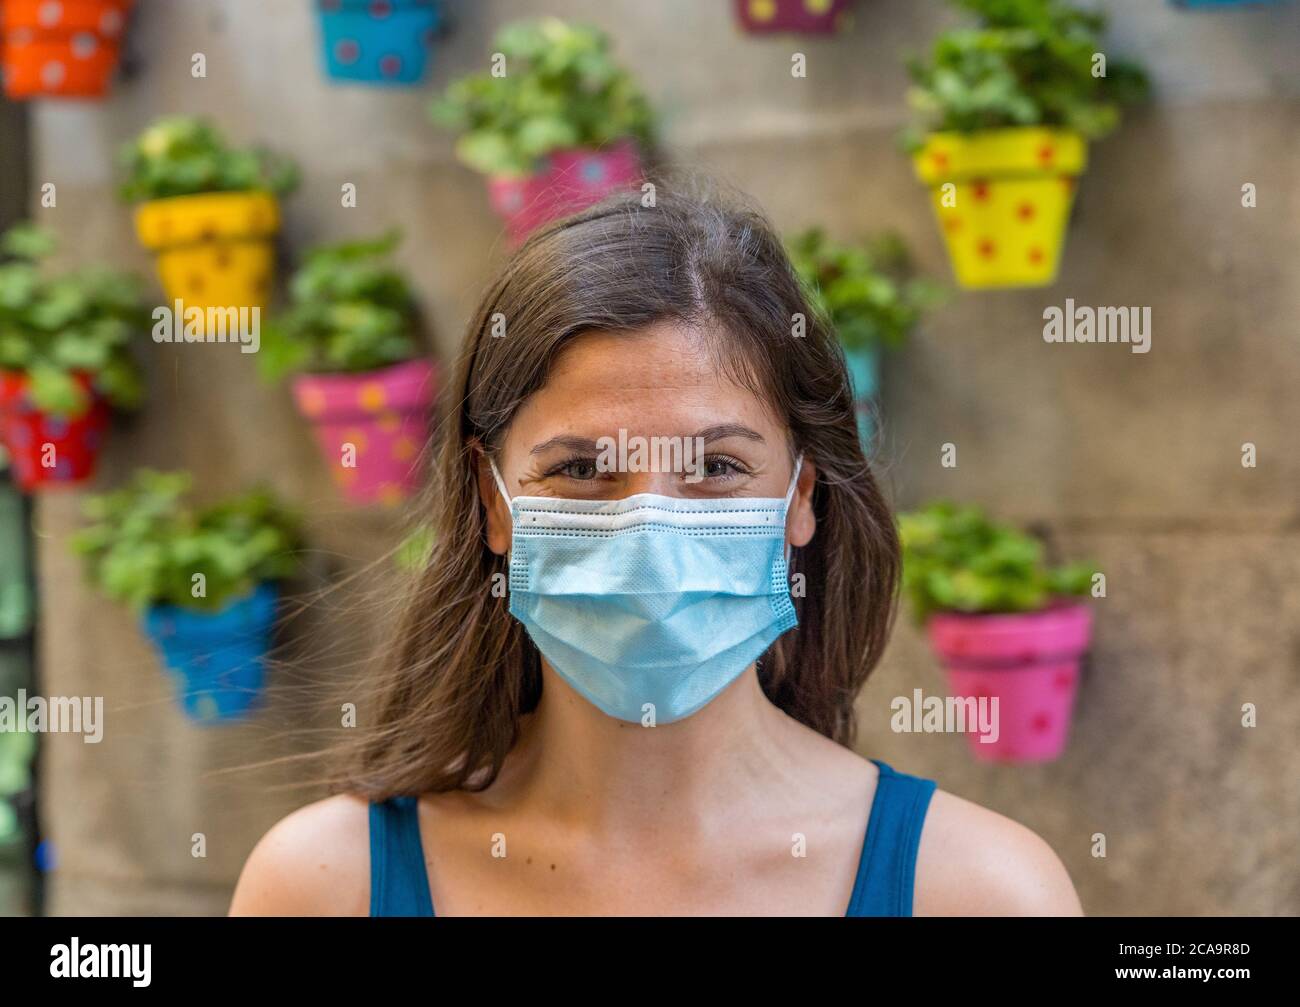 Young woman wearing surgical mask on face in public spaces. Coronavirus spreading protection mask protective against influenza viruses and diseases. P Stock Photo